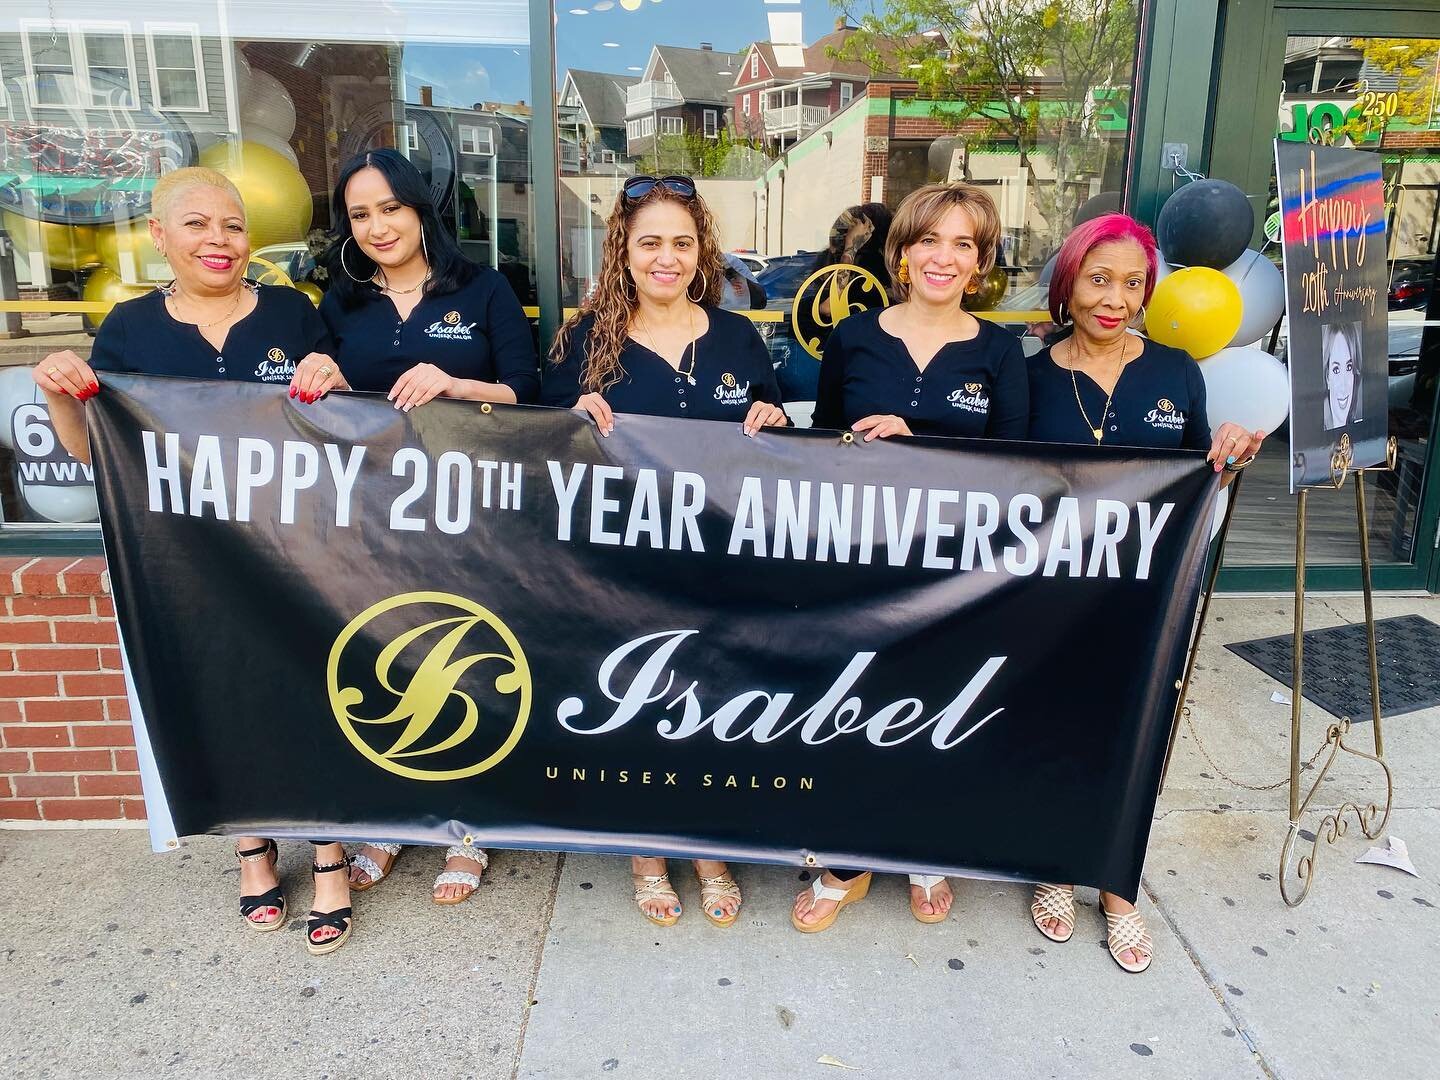 Celebrating 20 yrs in business in Dorchester. We honor Isabel Unisex Salon for holding down the block on Bowdoin Street! Stop by and wish them happy anniversary. 

#anniversay #unisex #hairsalon #shoplocal #capeverdean #kriola #smallbusiness #celebra